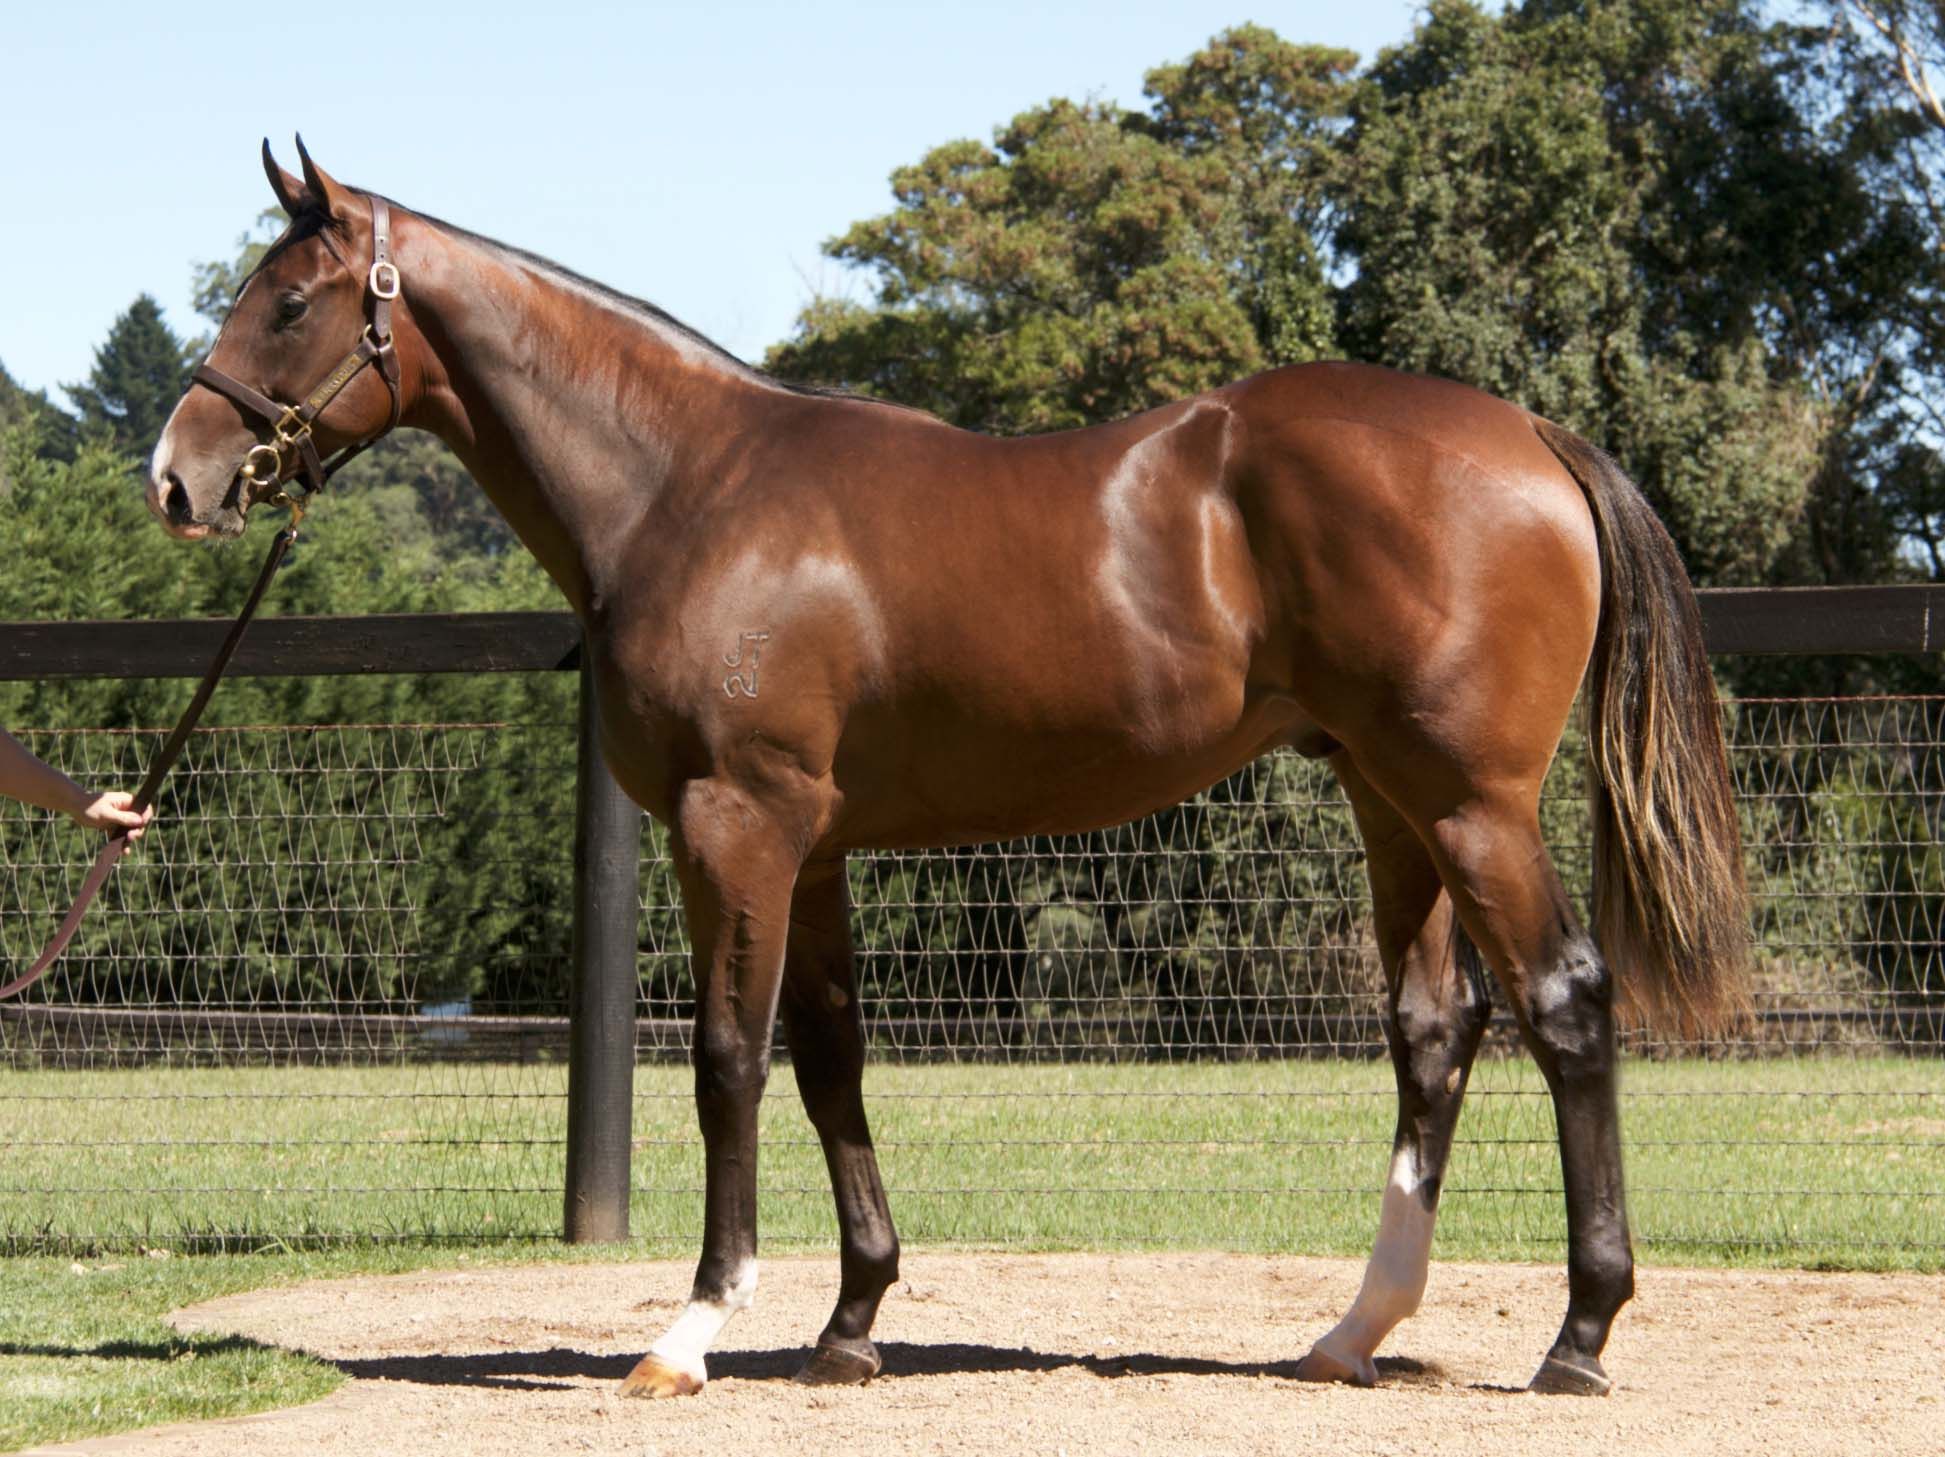 The Zoustar x Madamesta colt from Inglis Easter Yearling Sale